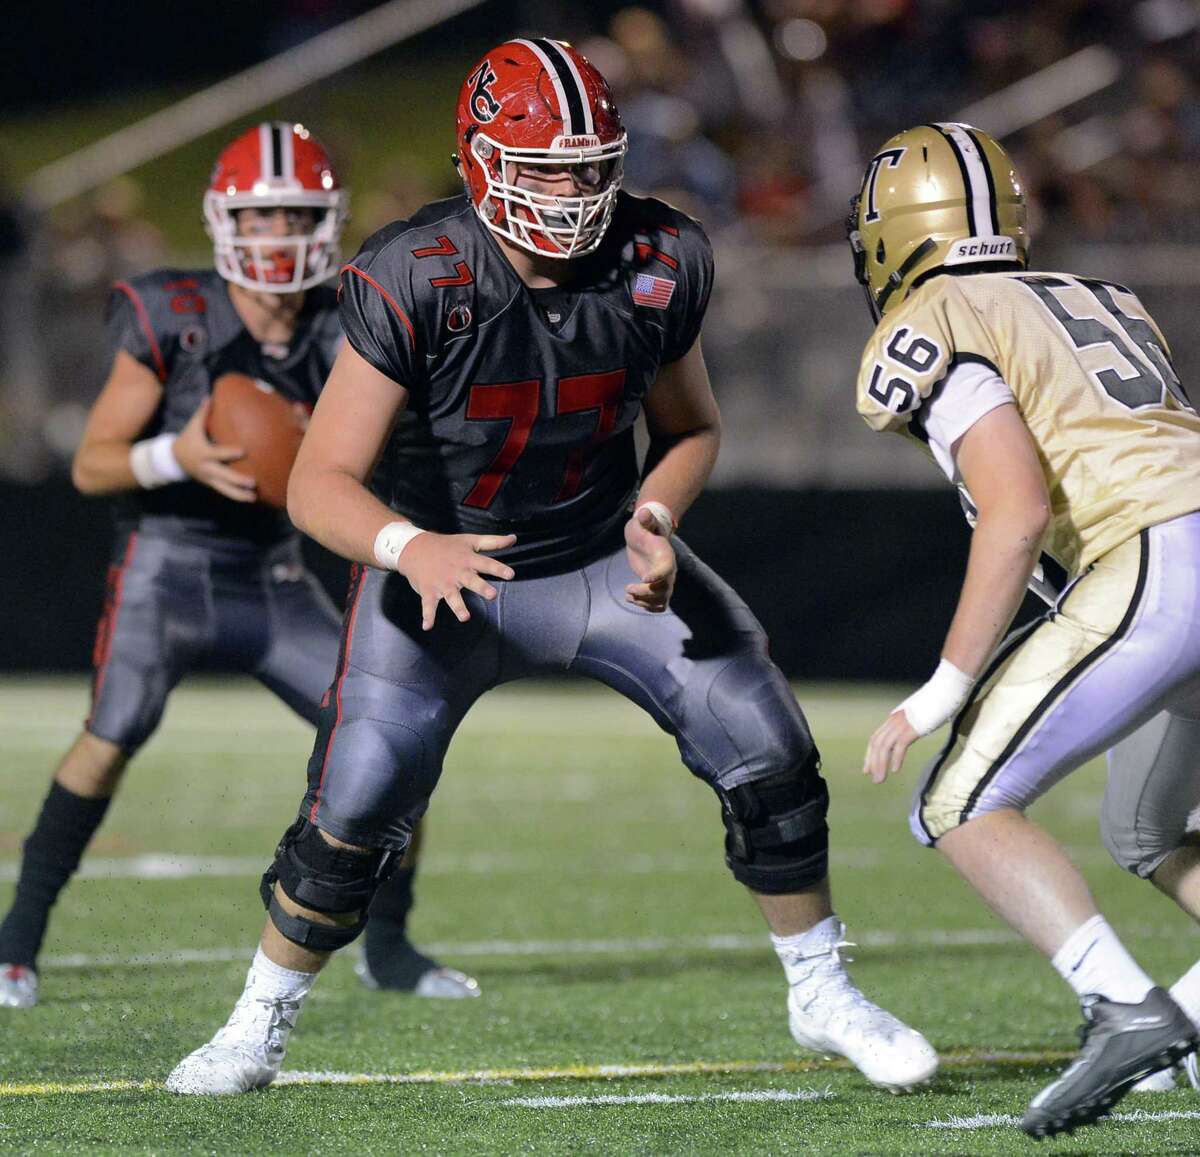 New Canaan defeated Trumbull 61-14 in a FCIAC varsity football game in New Canaan, Connecticut on Friday, Sept. 22, 2017.